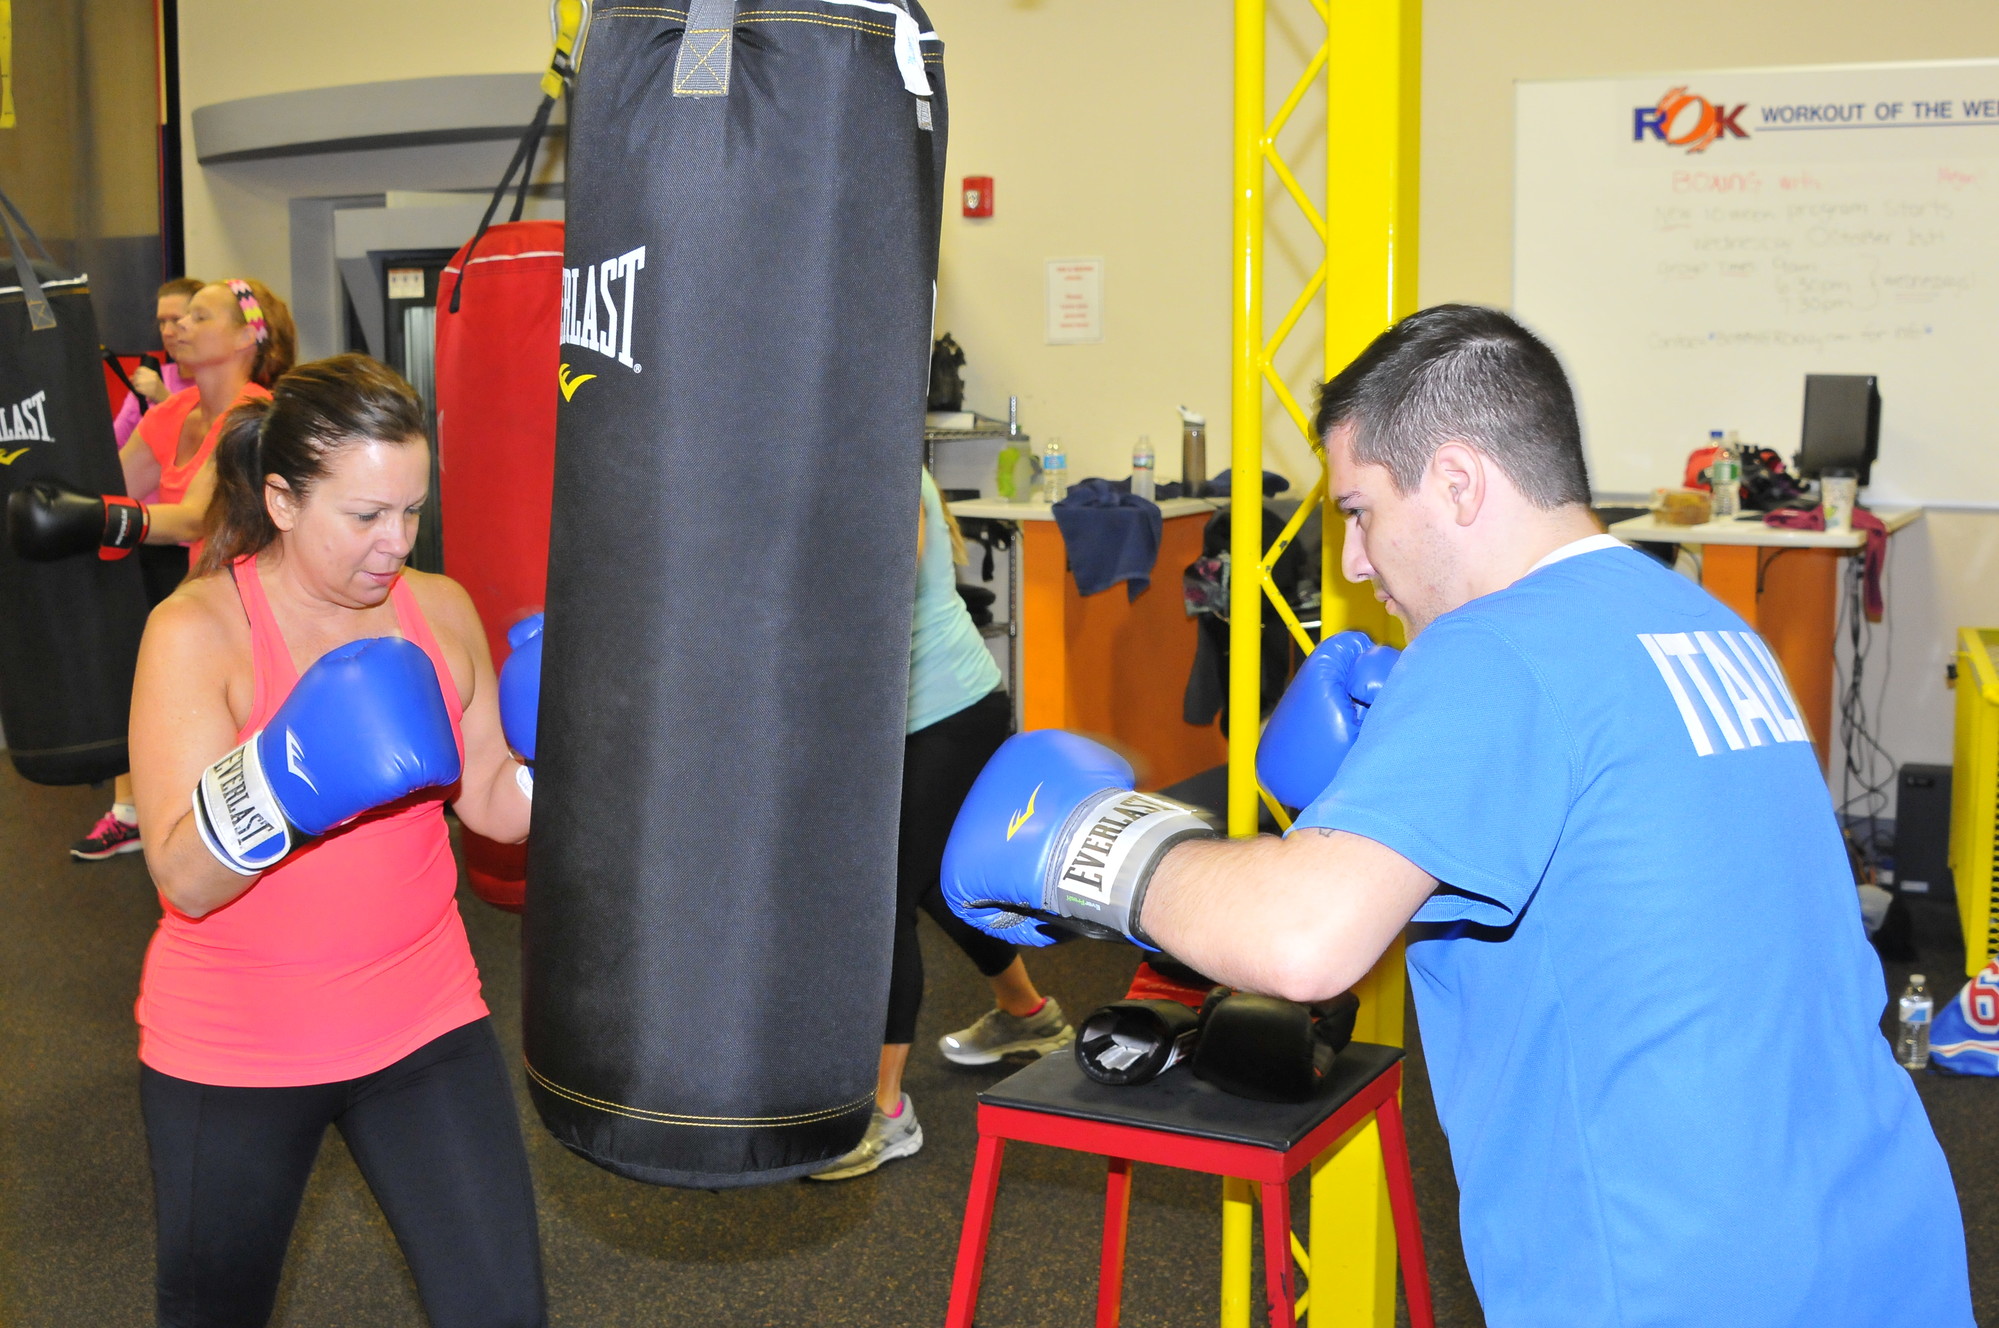 Tina Giamo and Vinny Donato shared the punching bad during Boxing Fusion.